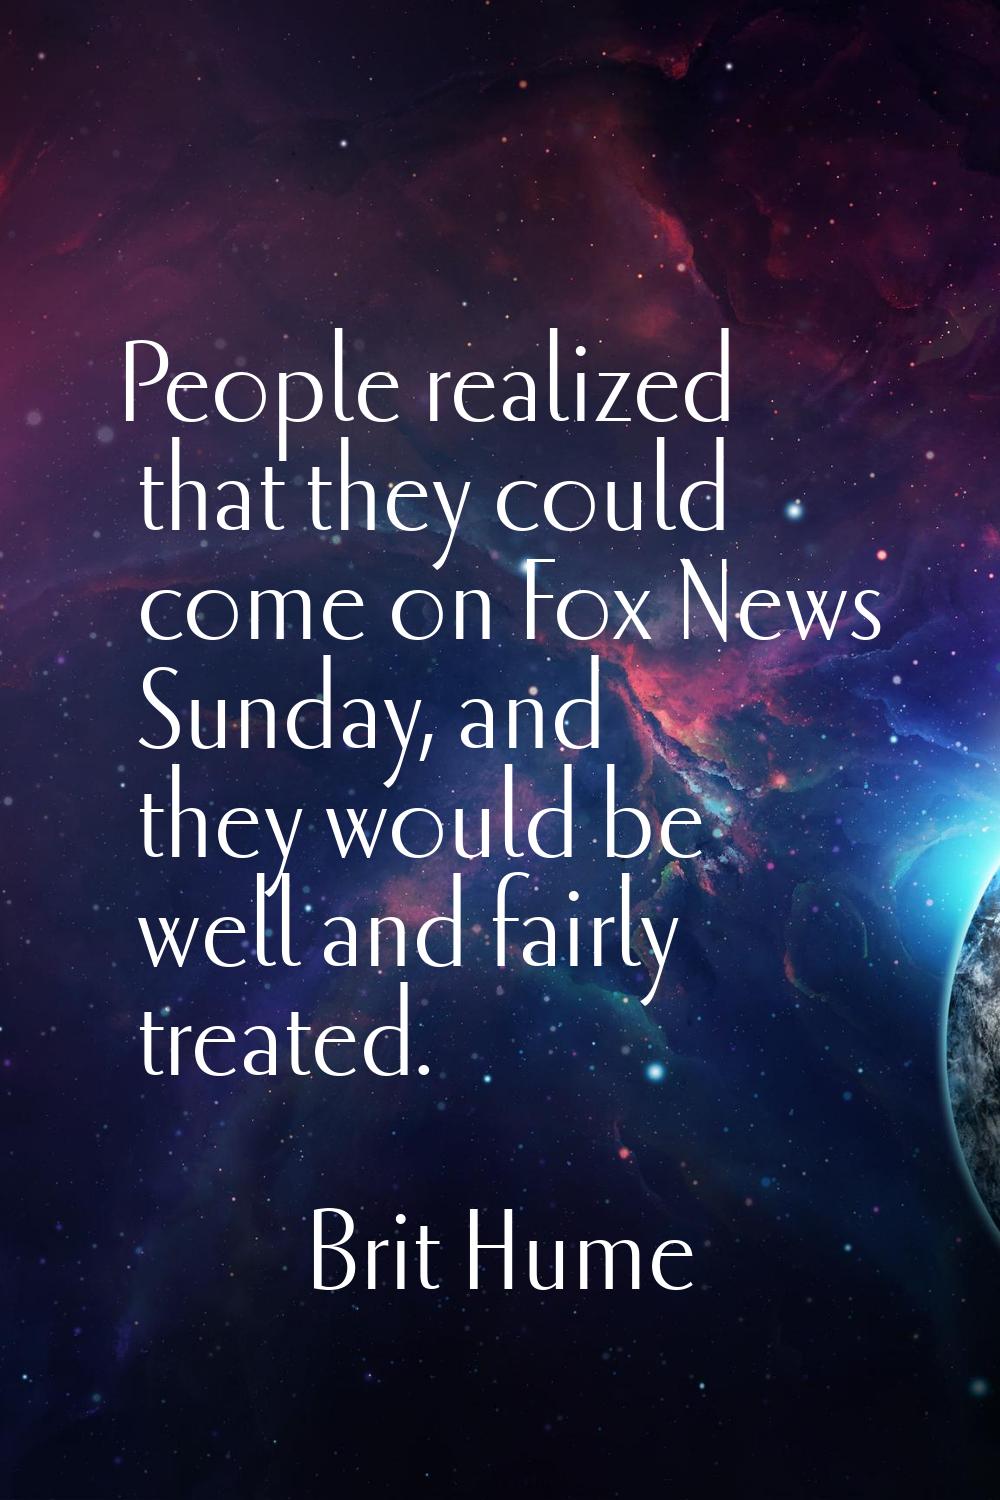 People realized that they could come on Fox News Sunday, and they would be well and fairly treated.